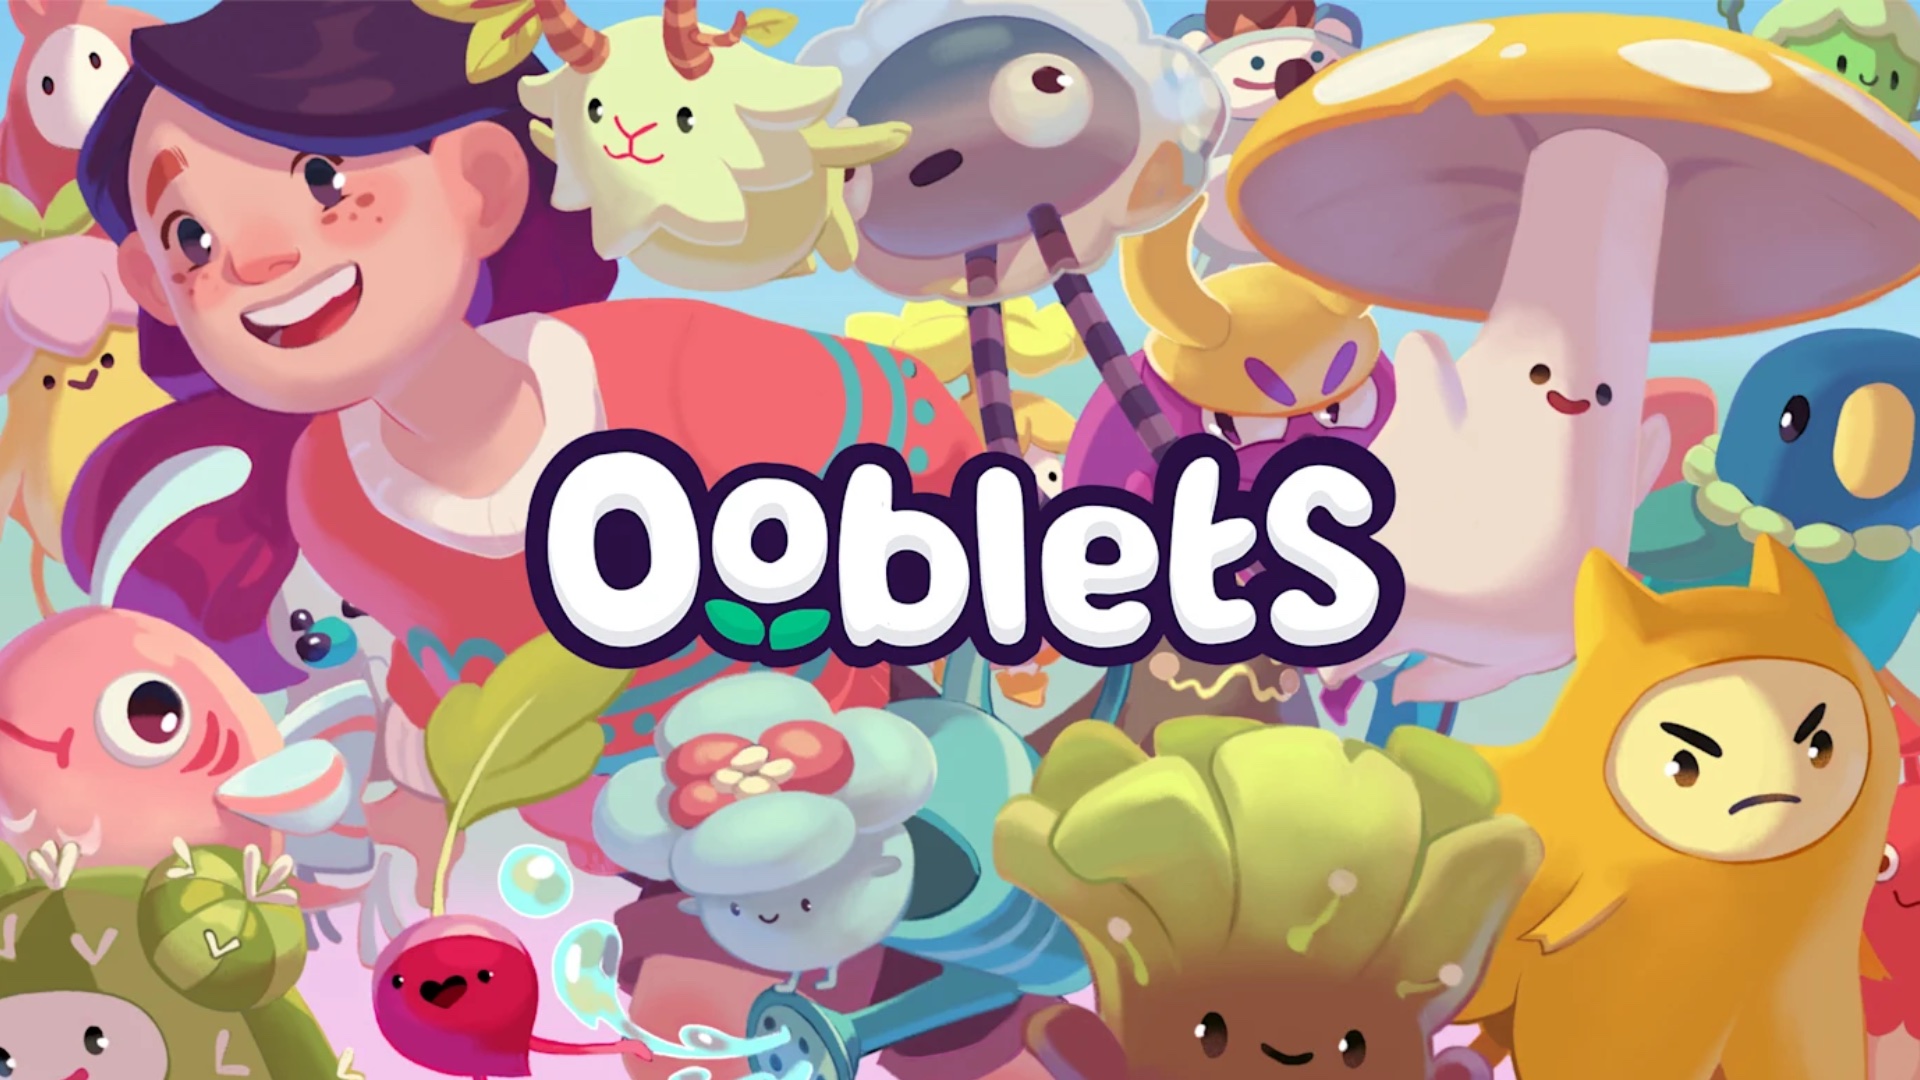 SwitchArcade Round-Up: Reviews Featuring ‘Ooblets’ and ‘Aquadine’, Plus the Latest Releases and Sales